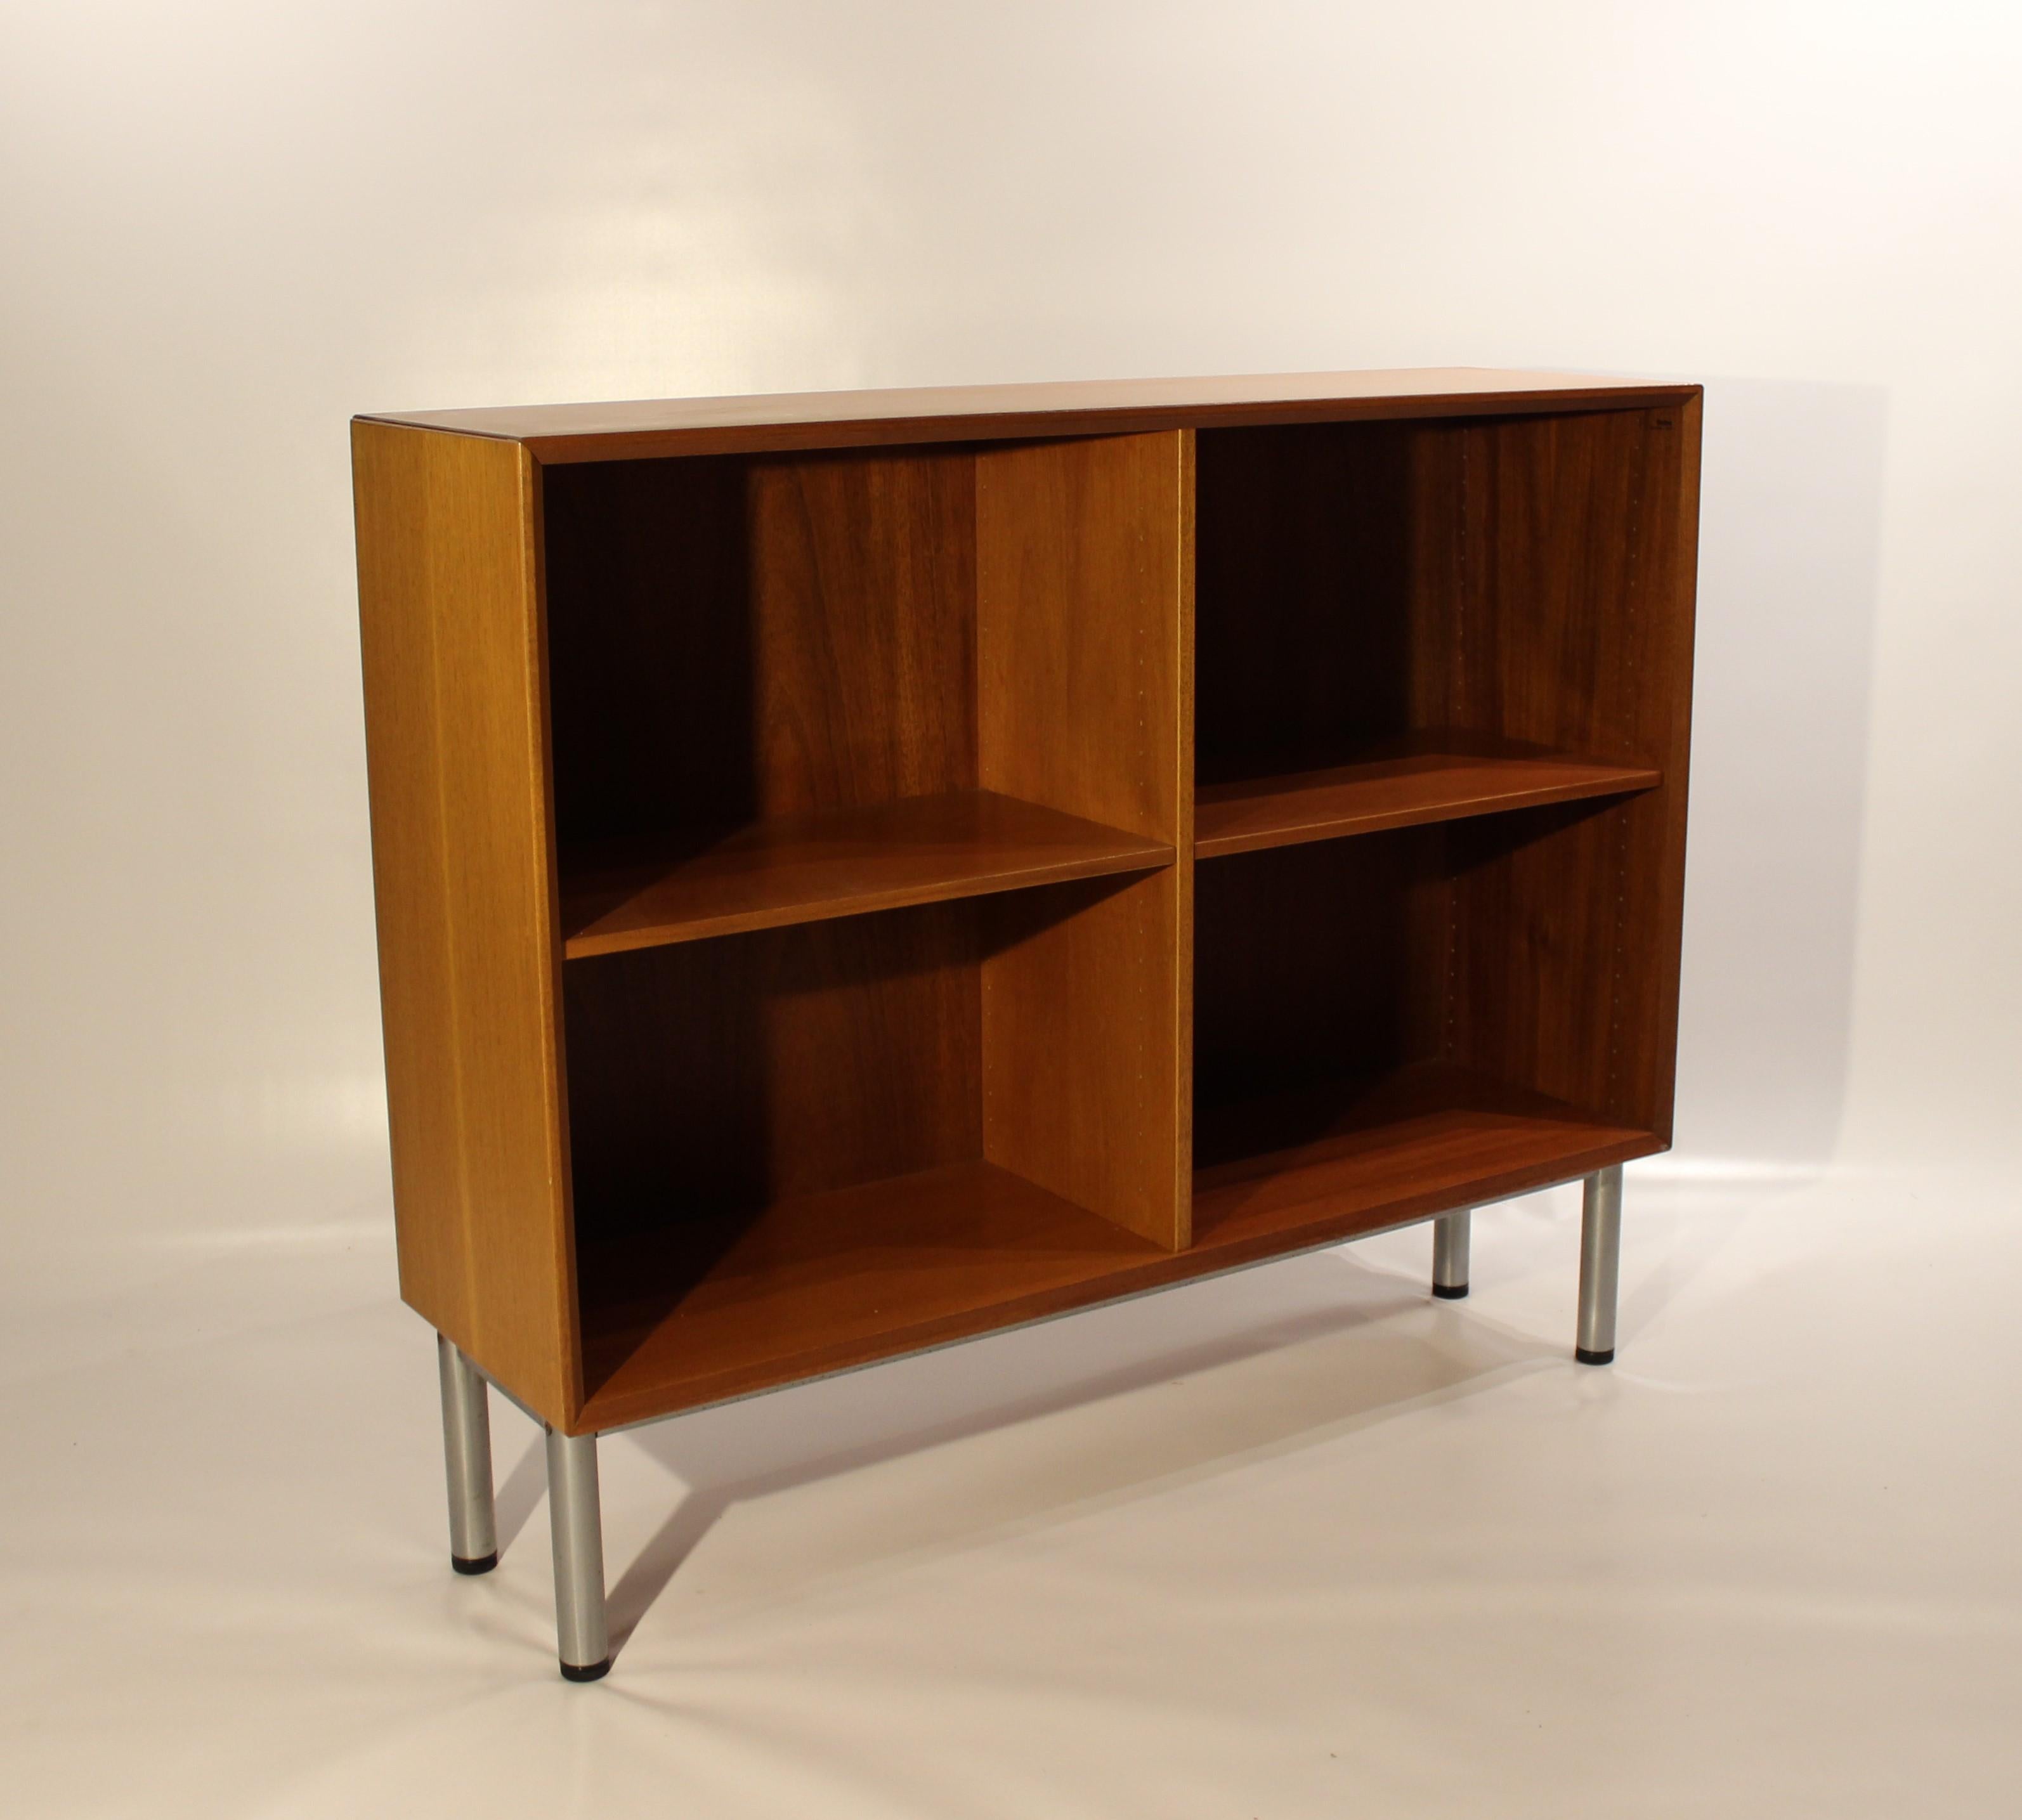 Scandinavian Modern Bookcase of Light Mahogany and Danish Design from the 1960s